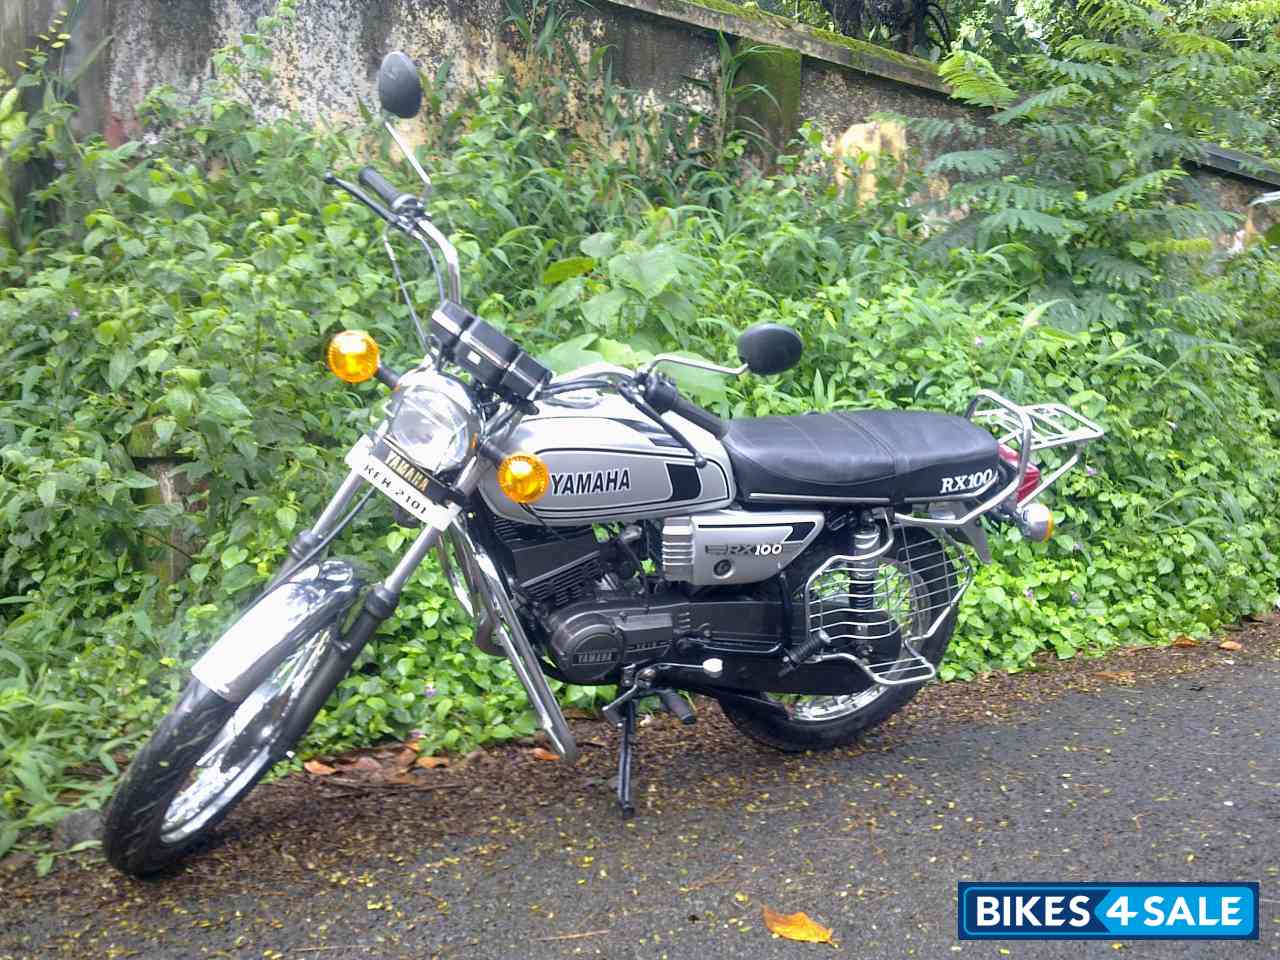 Used 1987 Model Yamaha Rx 100 For Sale In Kottayam Id 86387